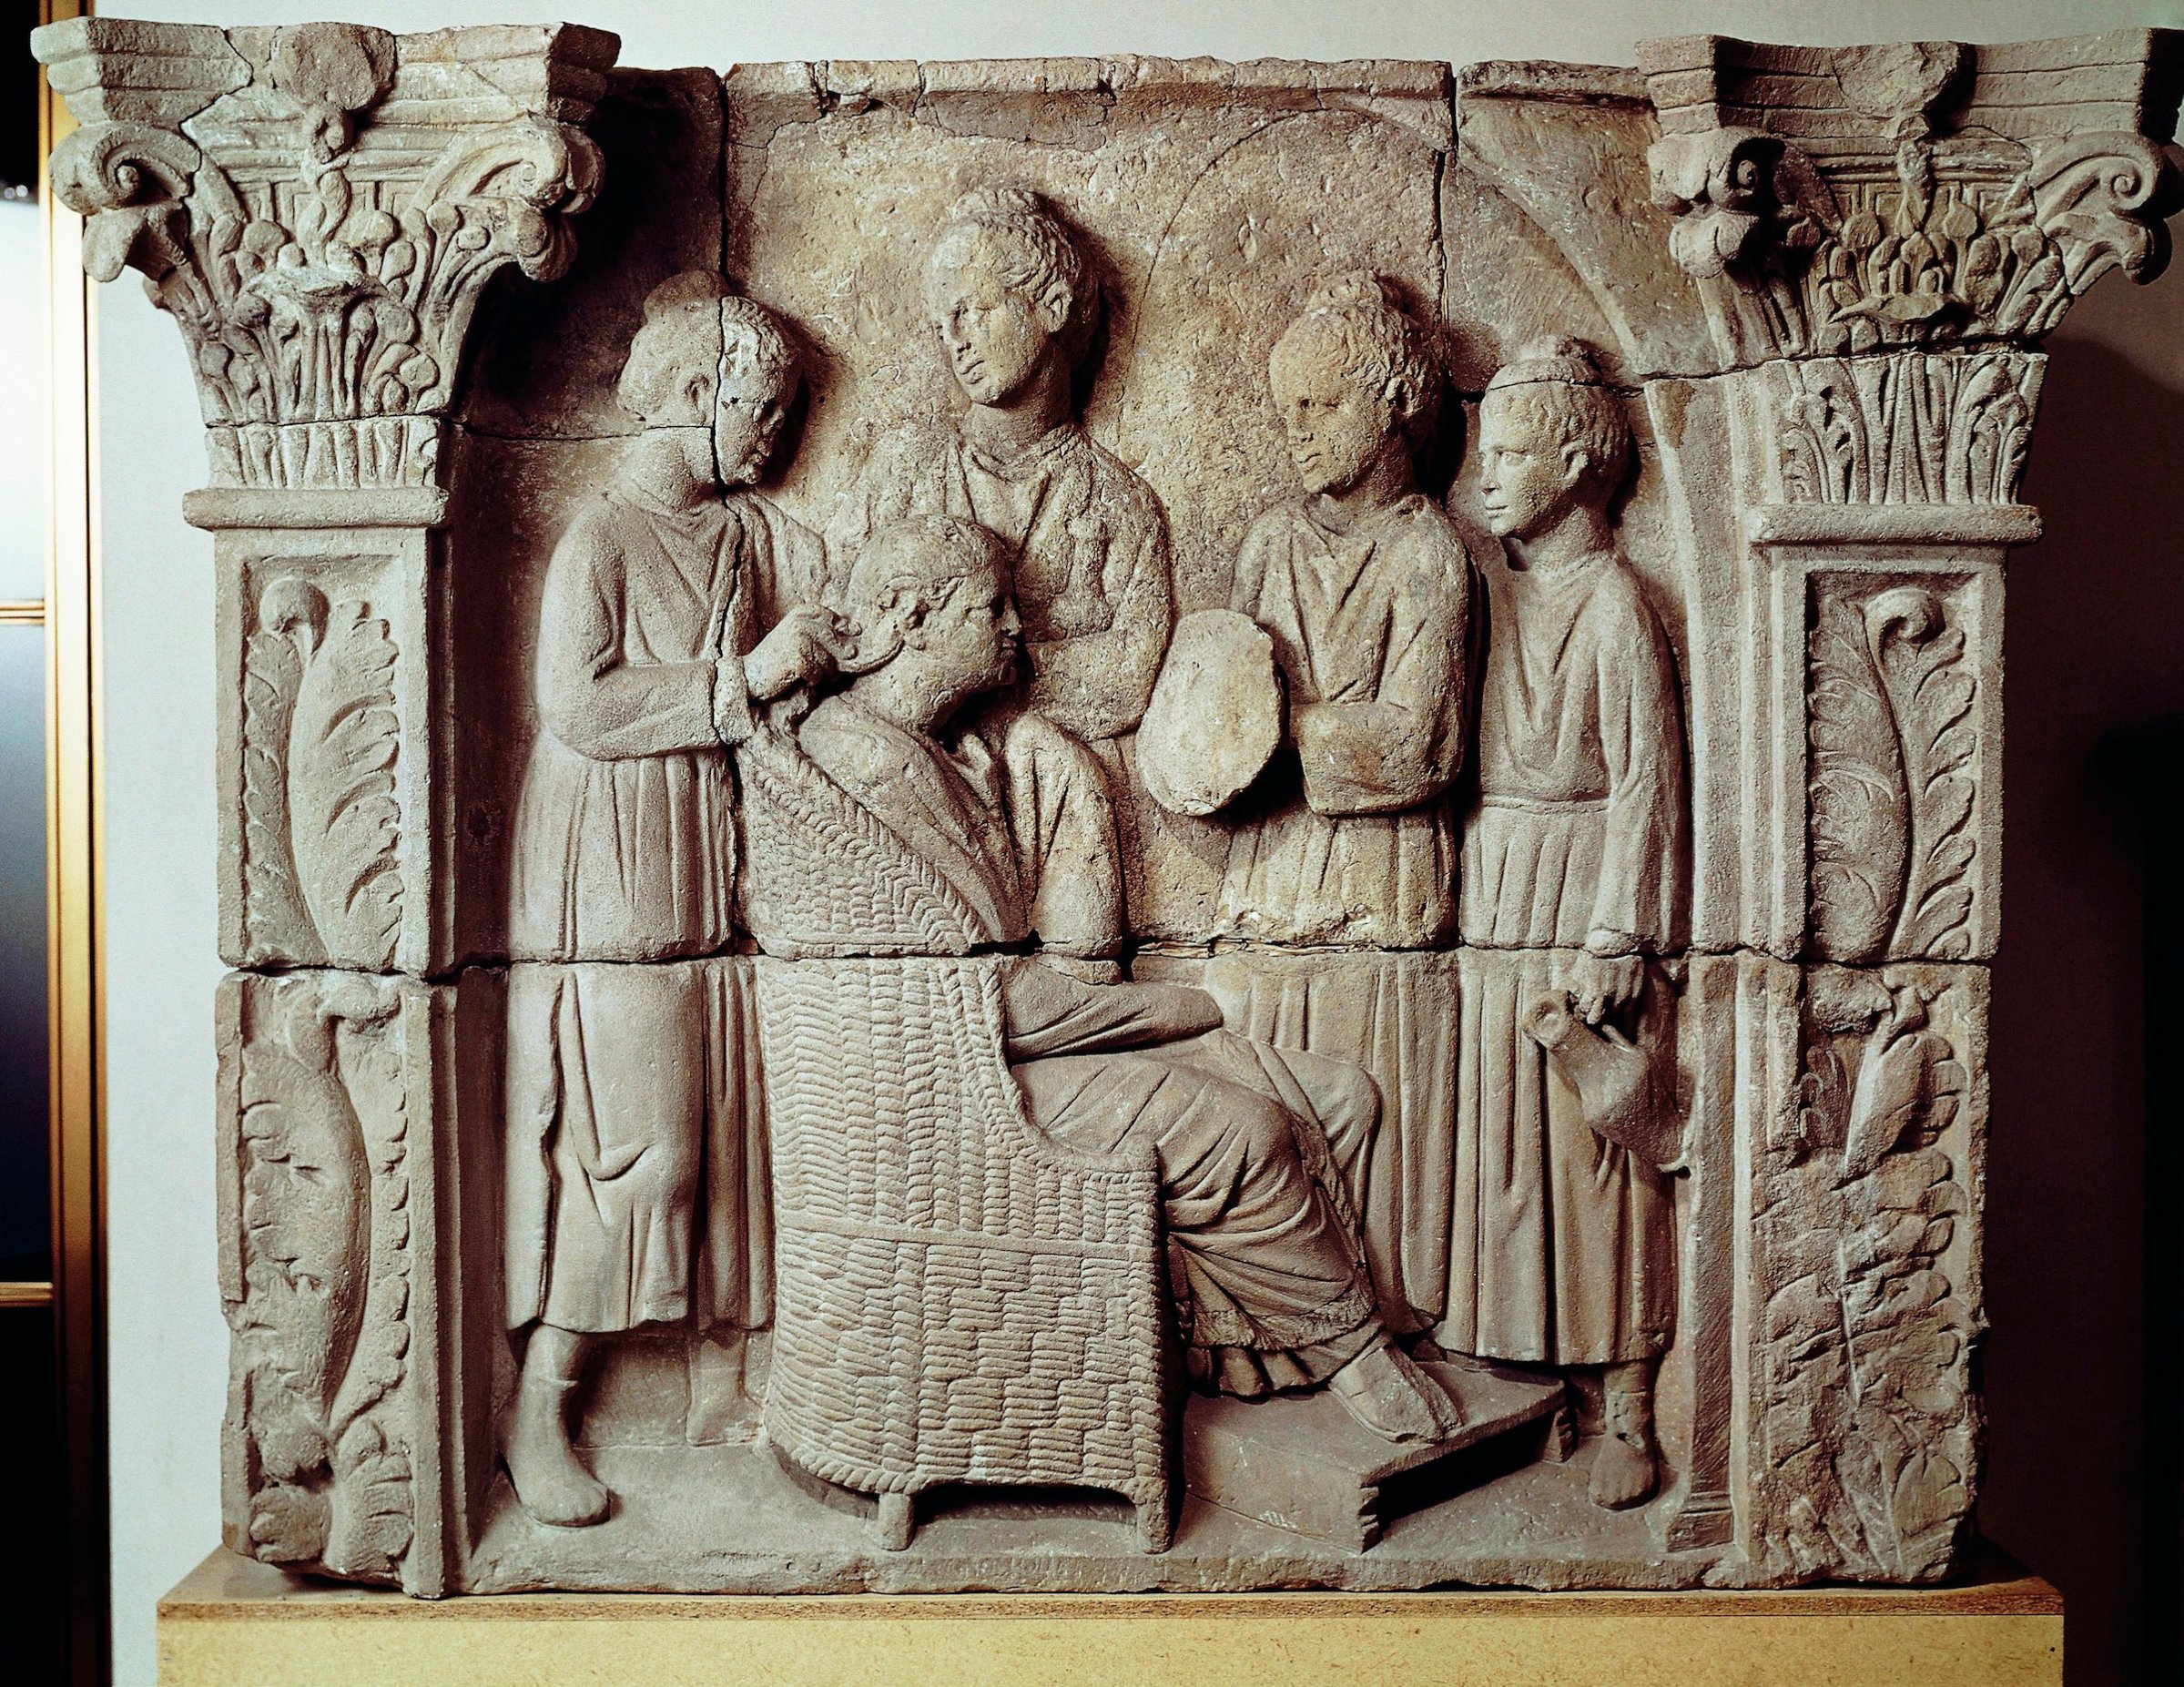 Roman civilization, relief portraying lady having her hair styled, from Neumagen-Dhron, Germany